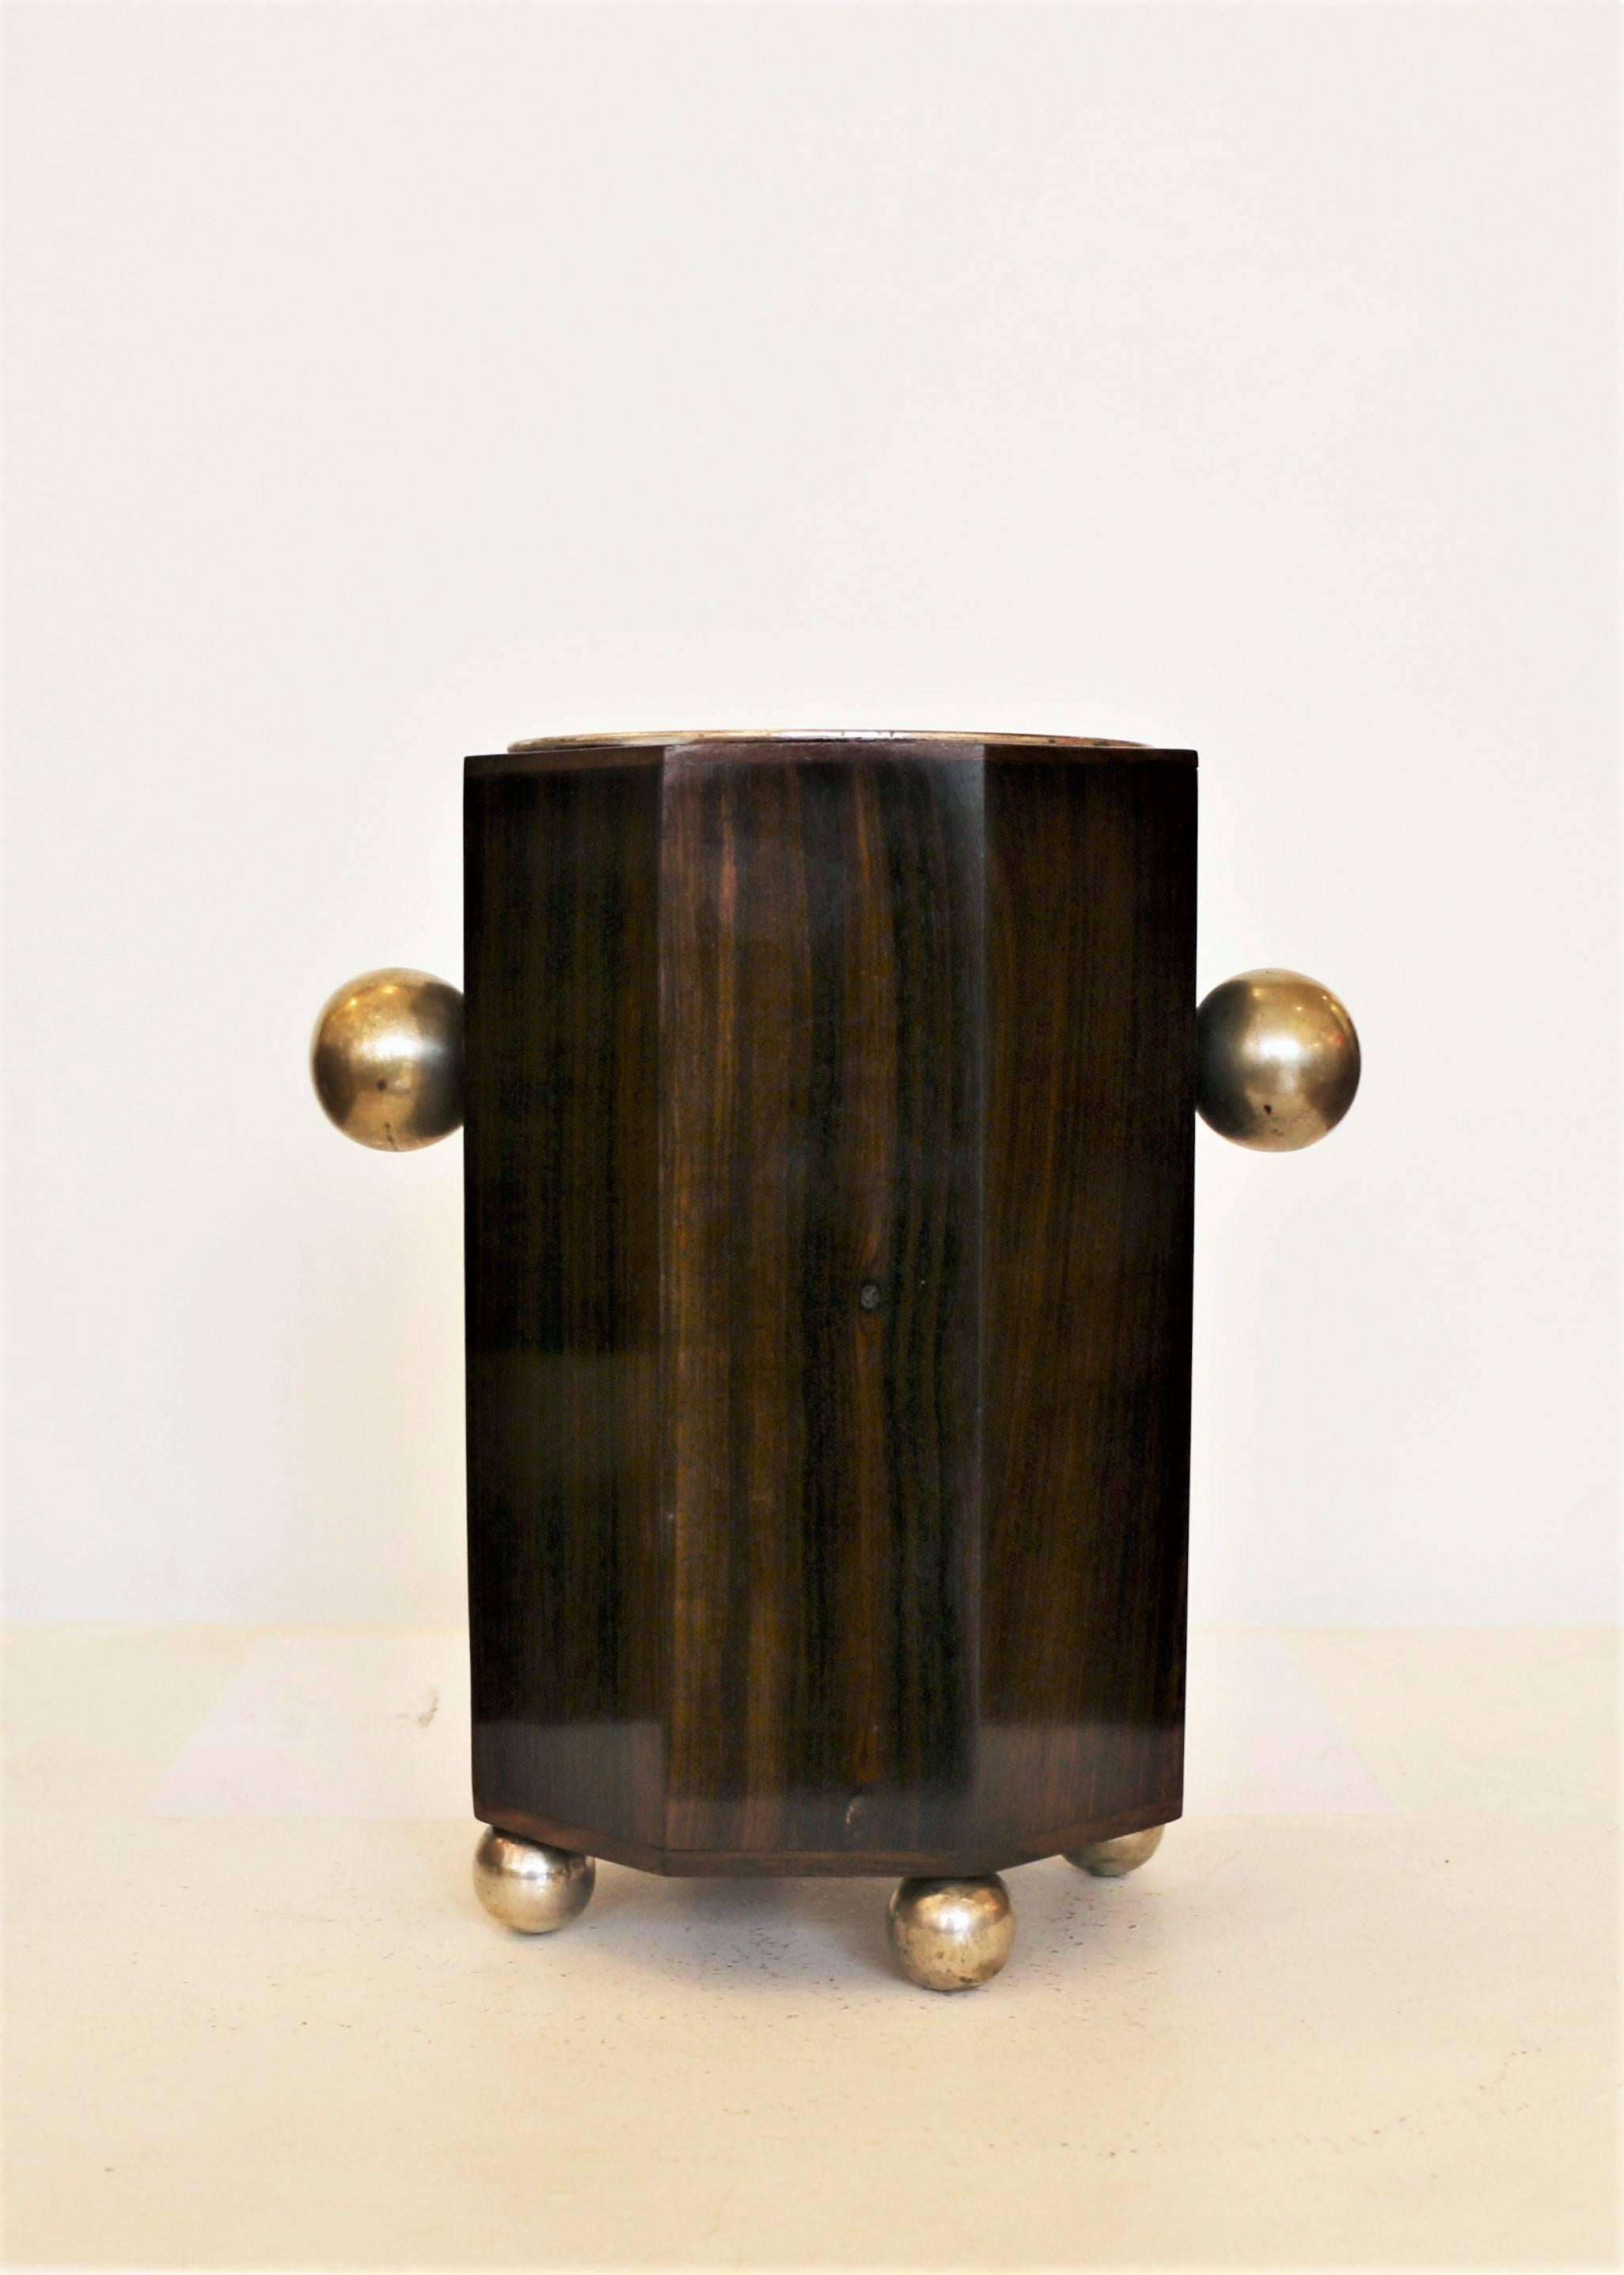 Art Deco wine cooler. Nickel-plated metal inside and Macassar ebony veneer. There are two nickeled handles on the sides, and four spheres serving as legs for the cooler.
It can be used as wine cooler (its original use) or as a flower